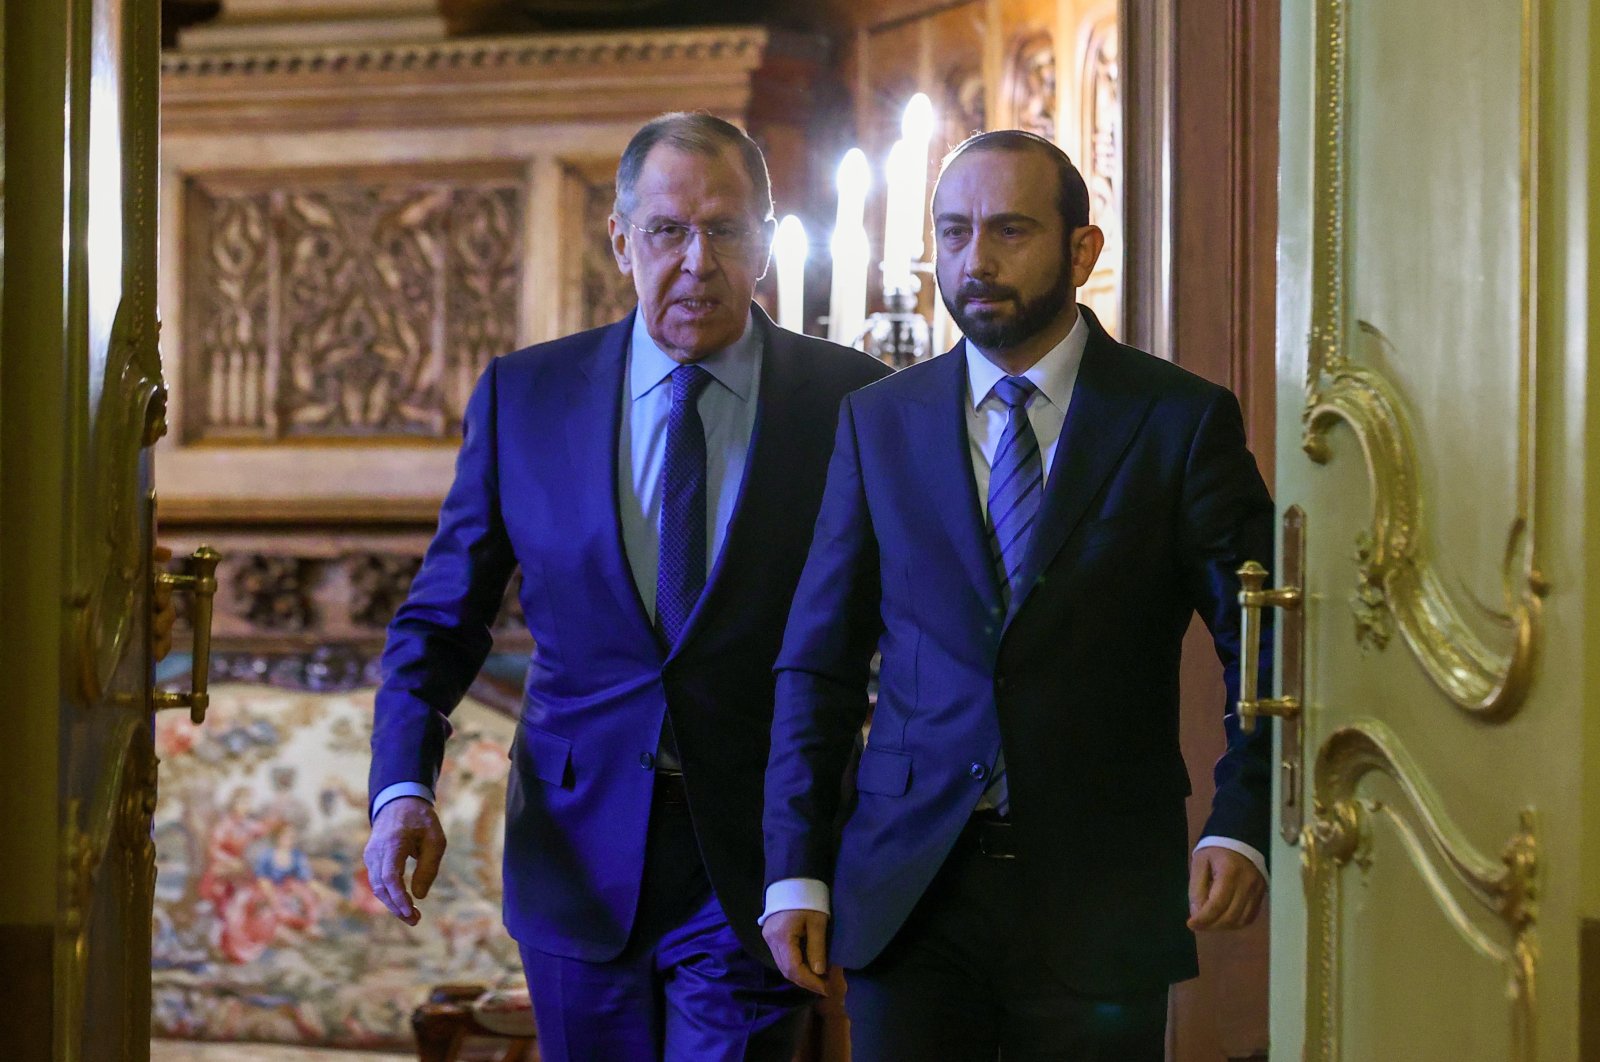 Russian Foreign Minister Sergey Lavrov (L) enters a hall with Armenia Foreign Minister Ararat Mirzoyan (R) for their joint news conference during their meeting in Moscow, Russia, March 20, 2023. (EPA Photo)